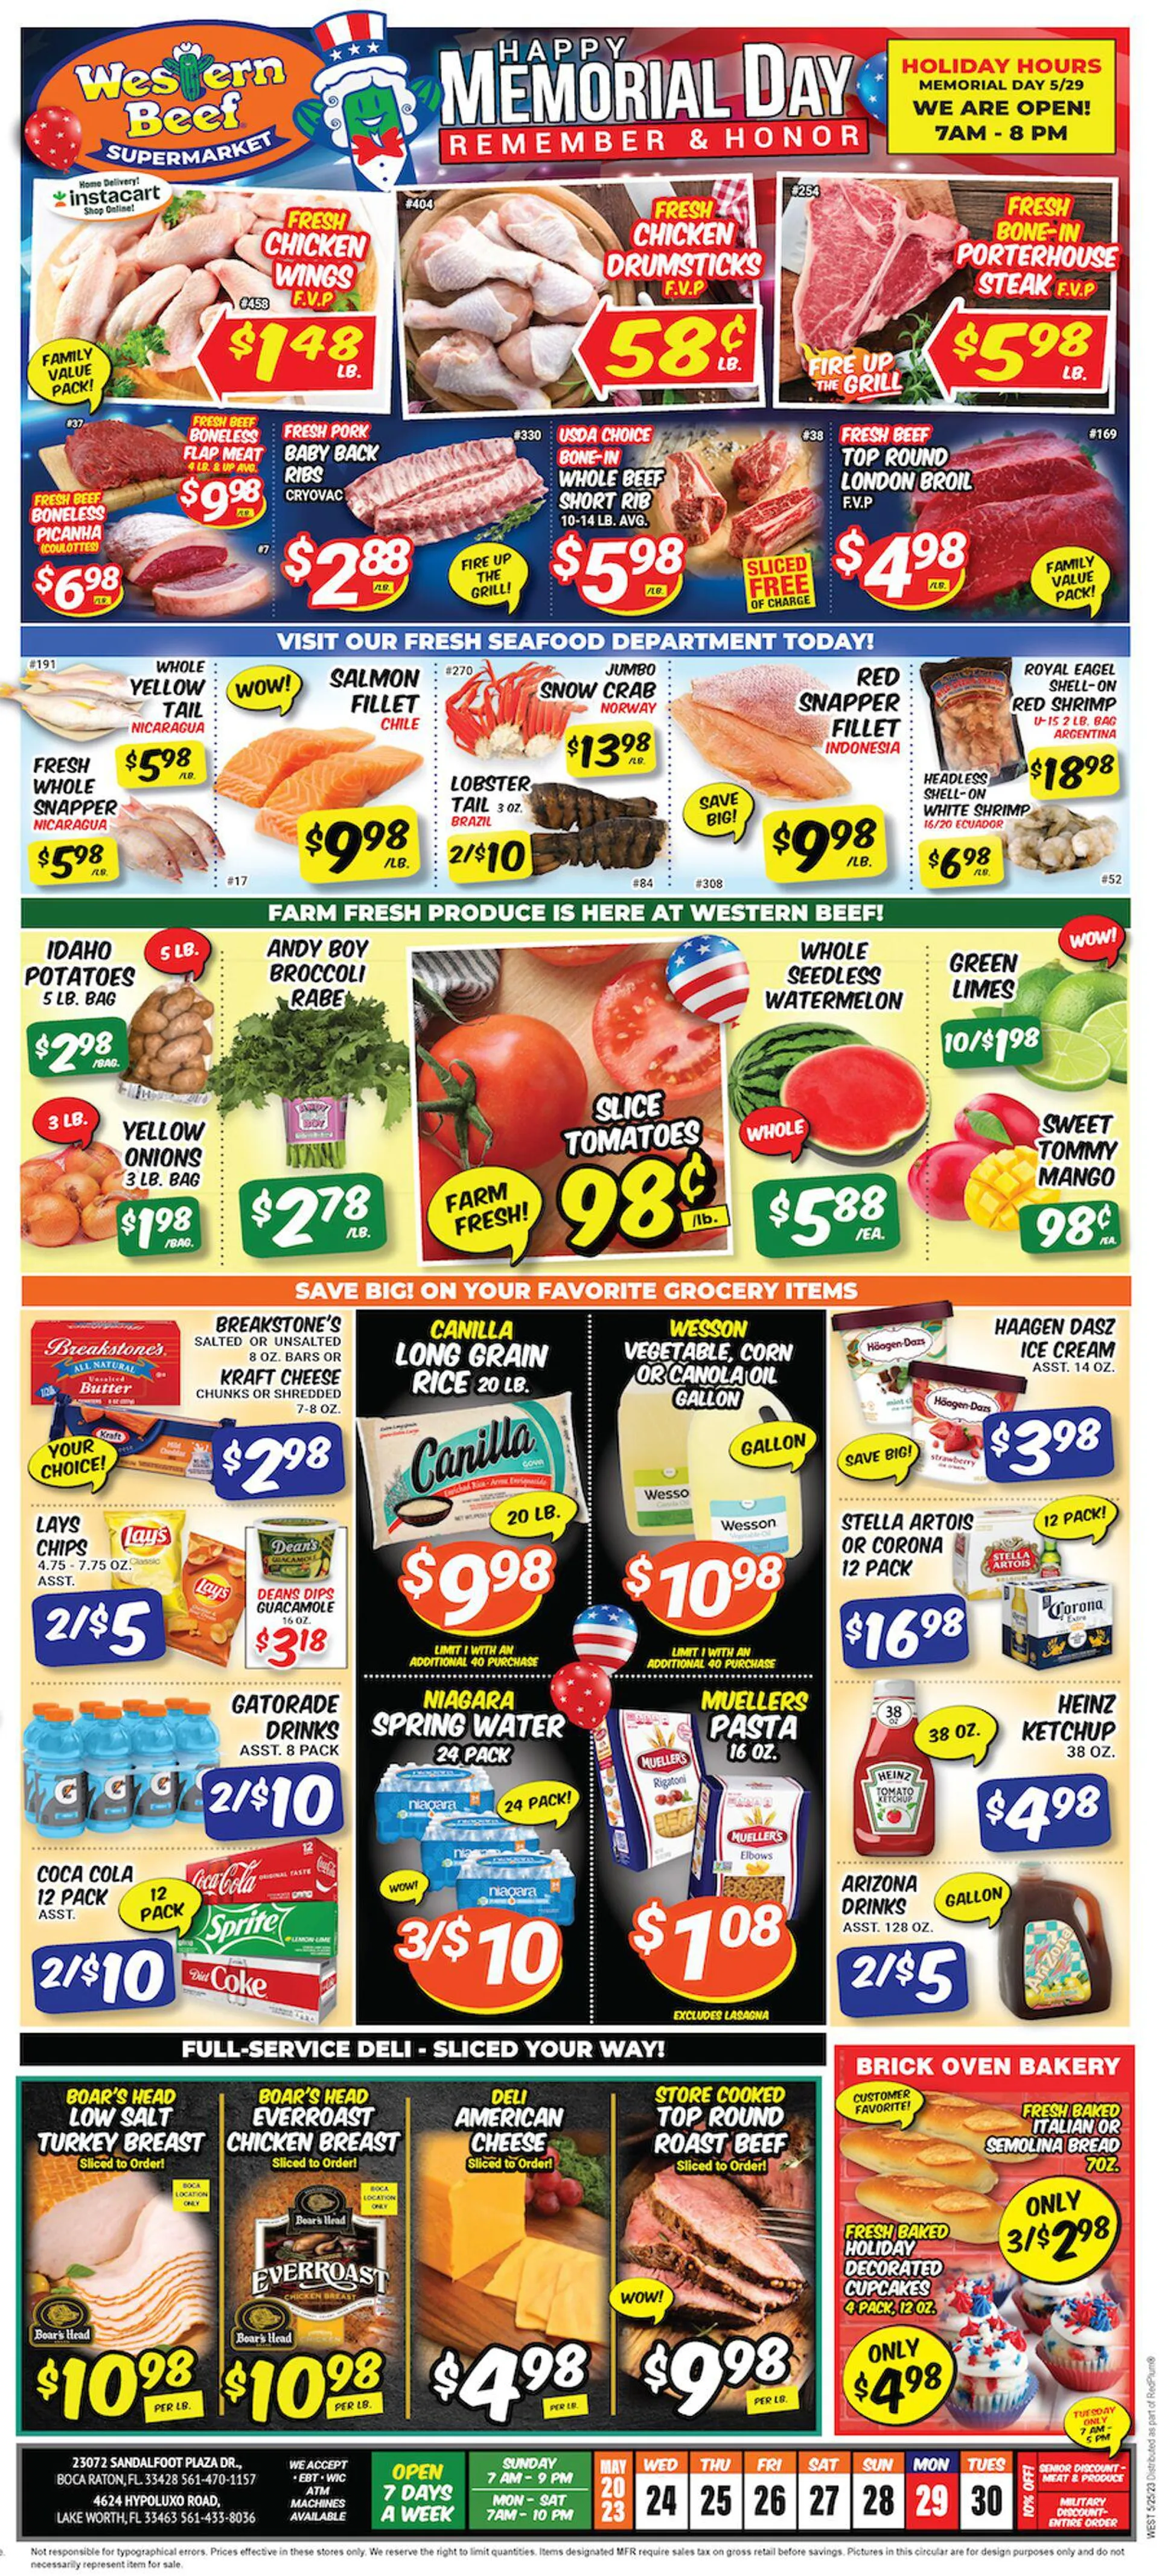 Western Beef Current weekly ad - 1